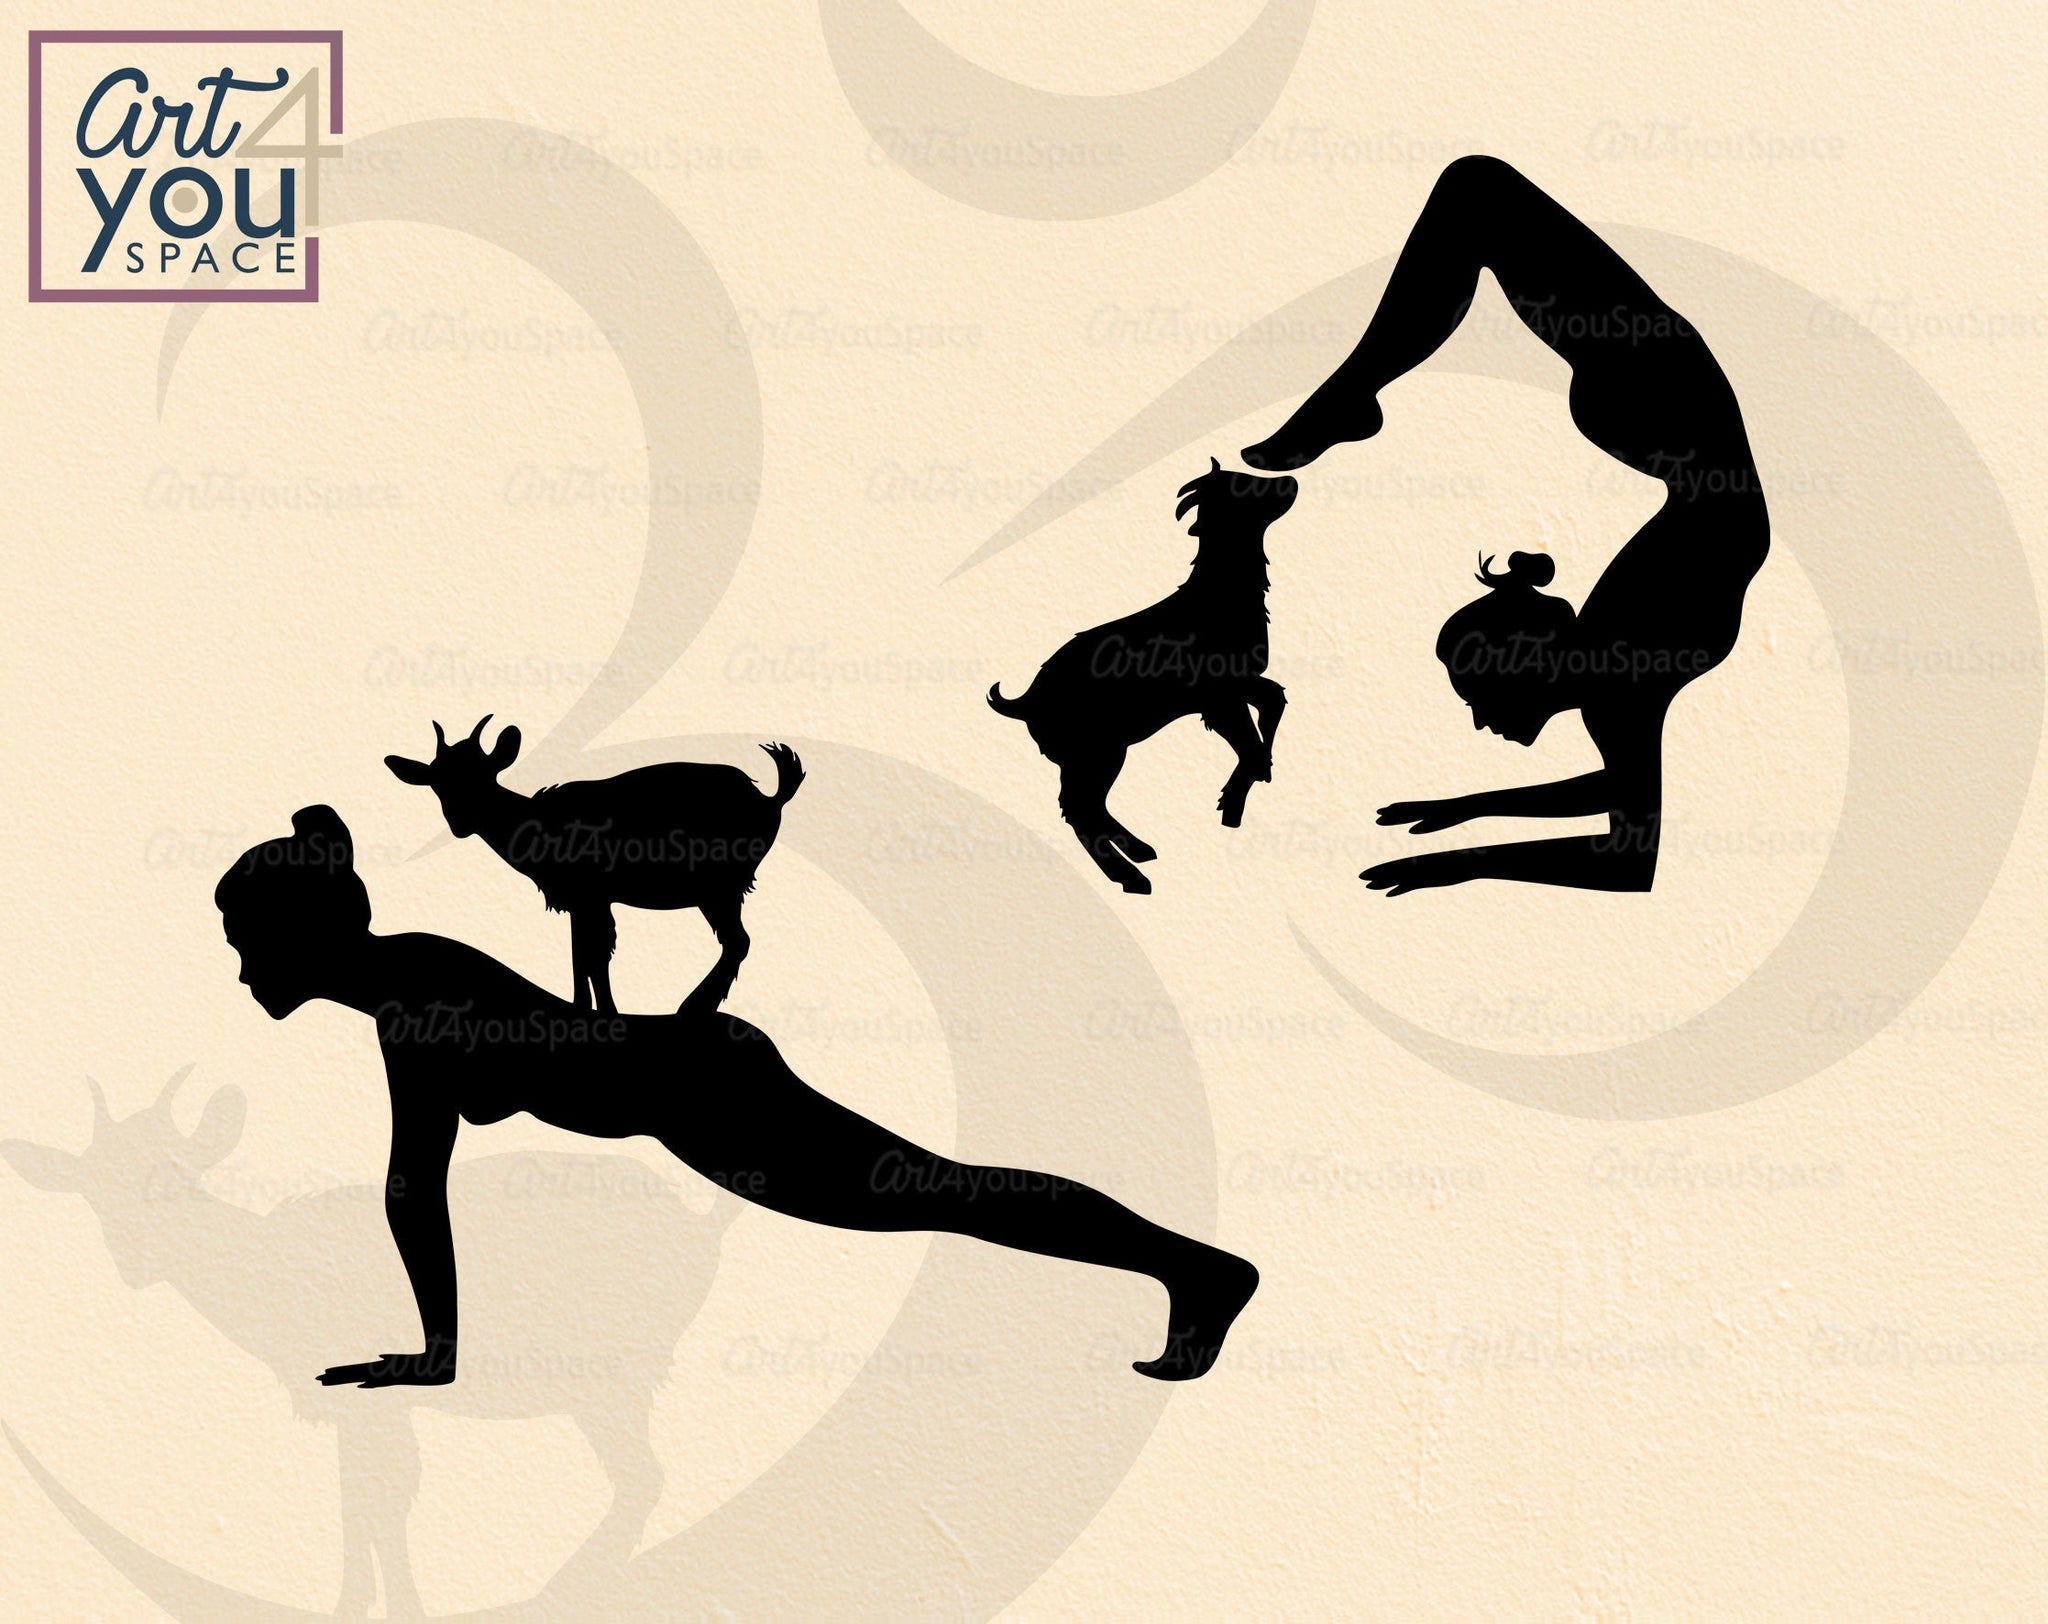 yoga pose silhouette png